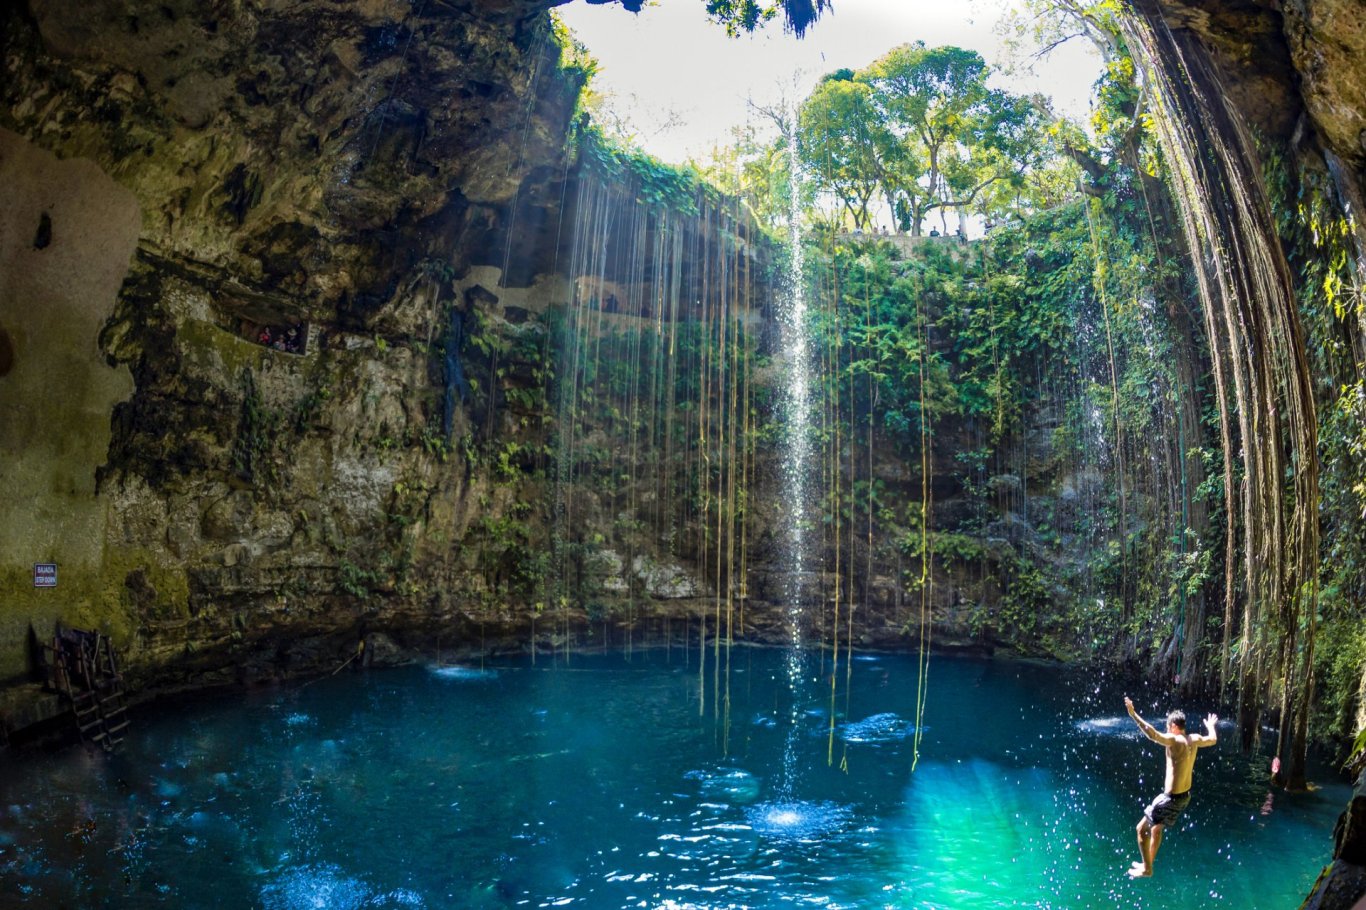 Mexican Cenote - blue water surrounded by limestone rock with man mid air jumping in the water